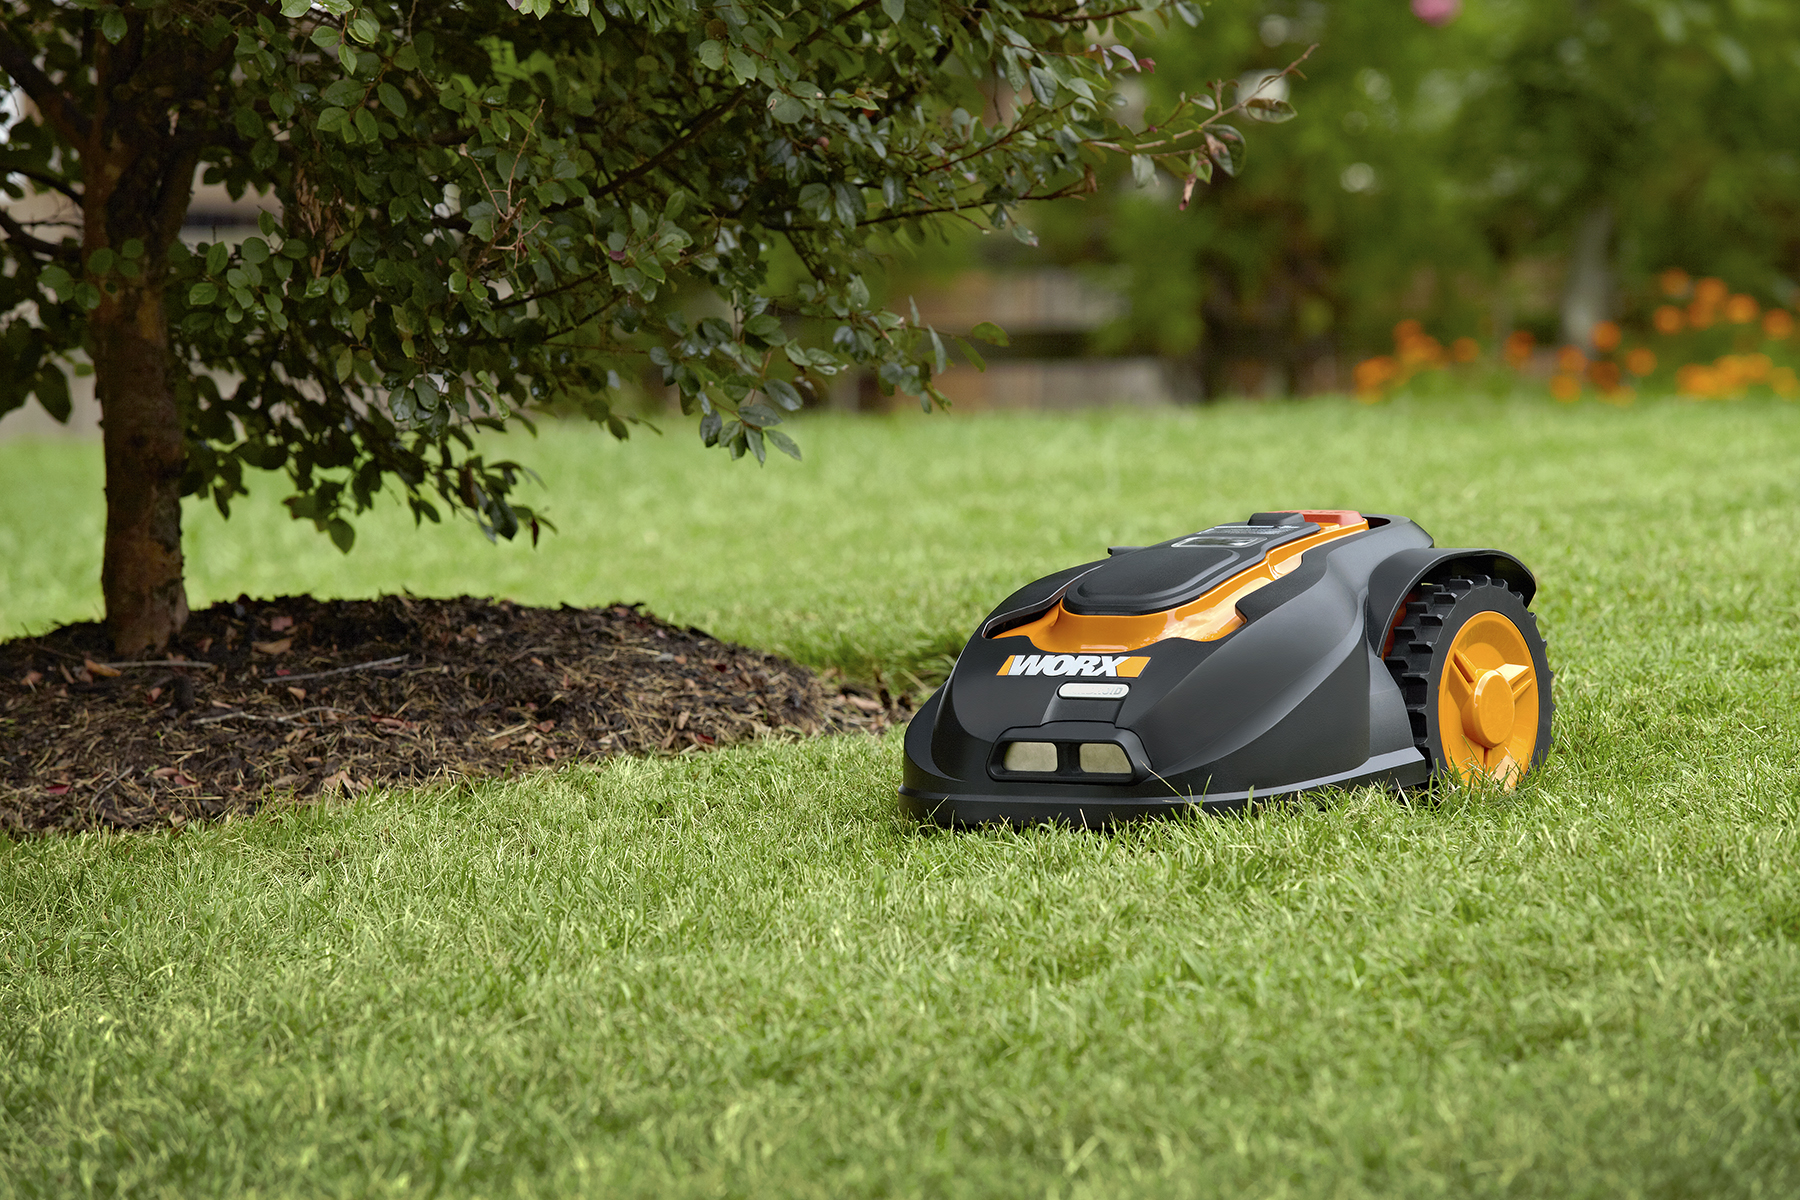 WORX Landroid avoids obstacles, such as trees  and flower beds.